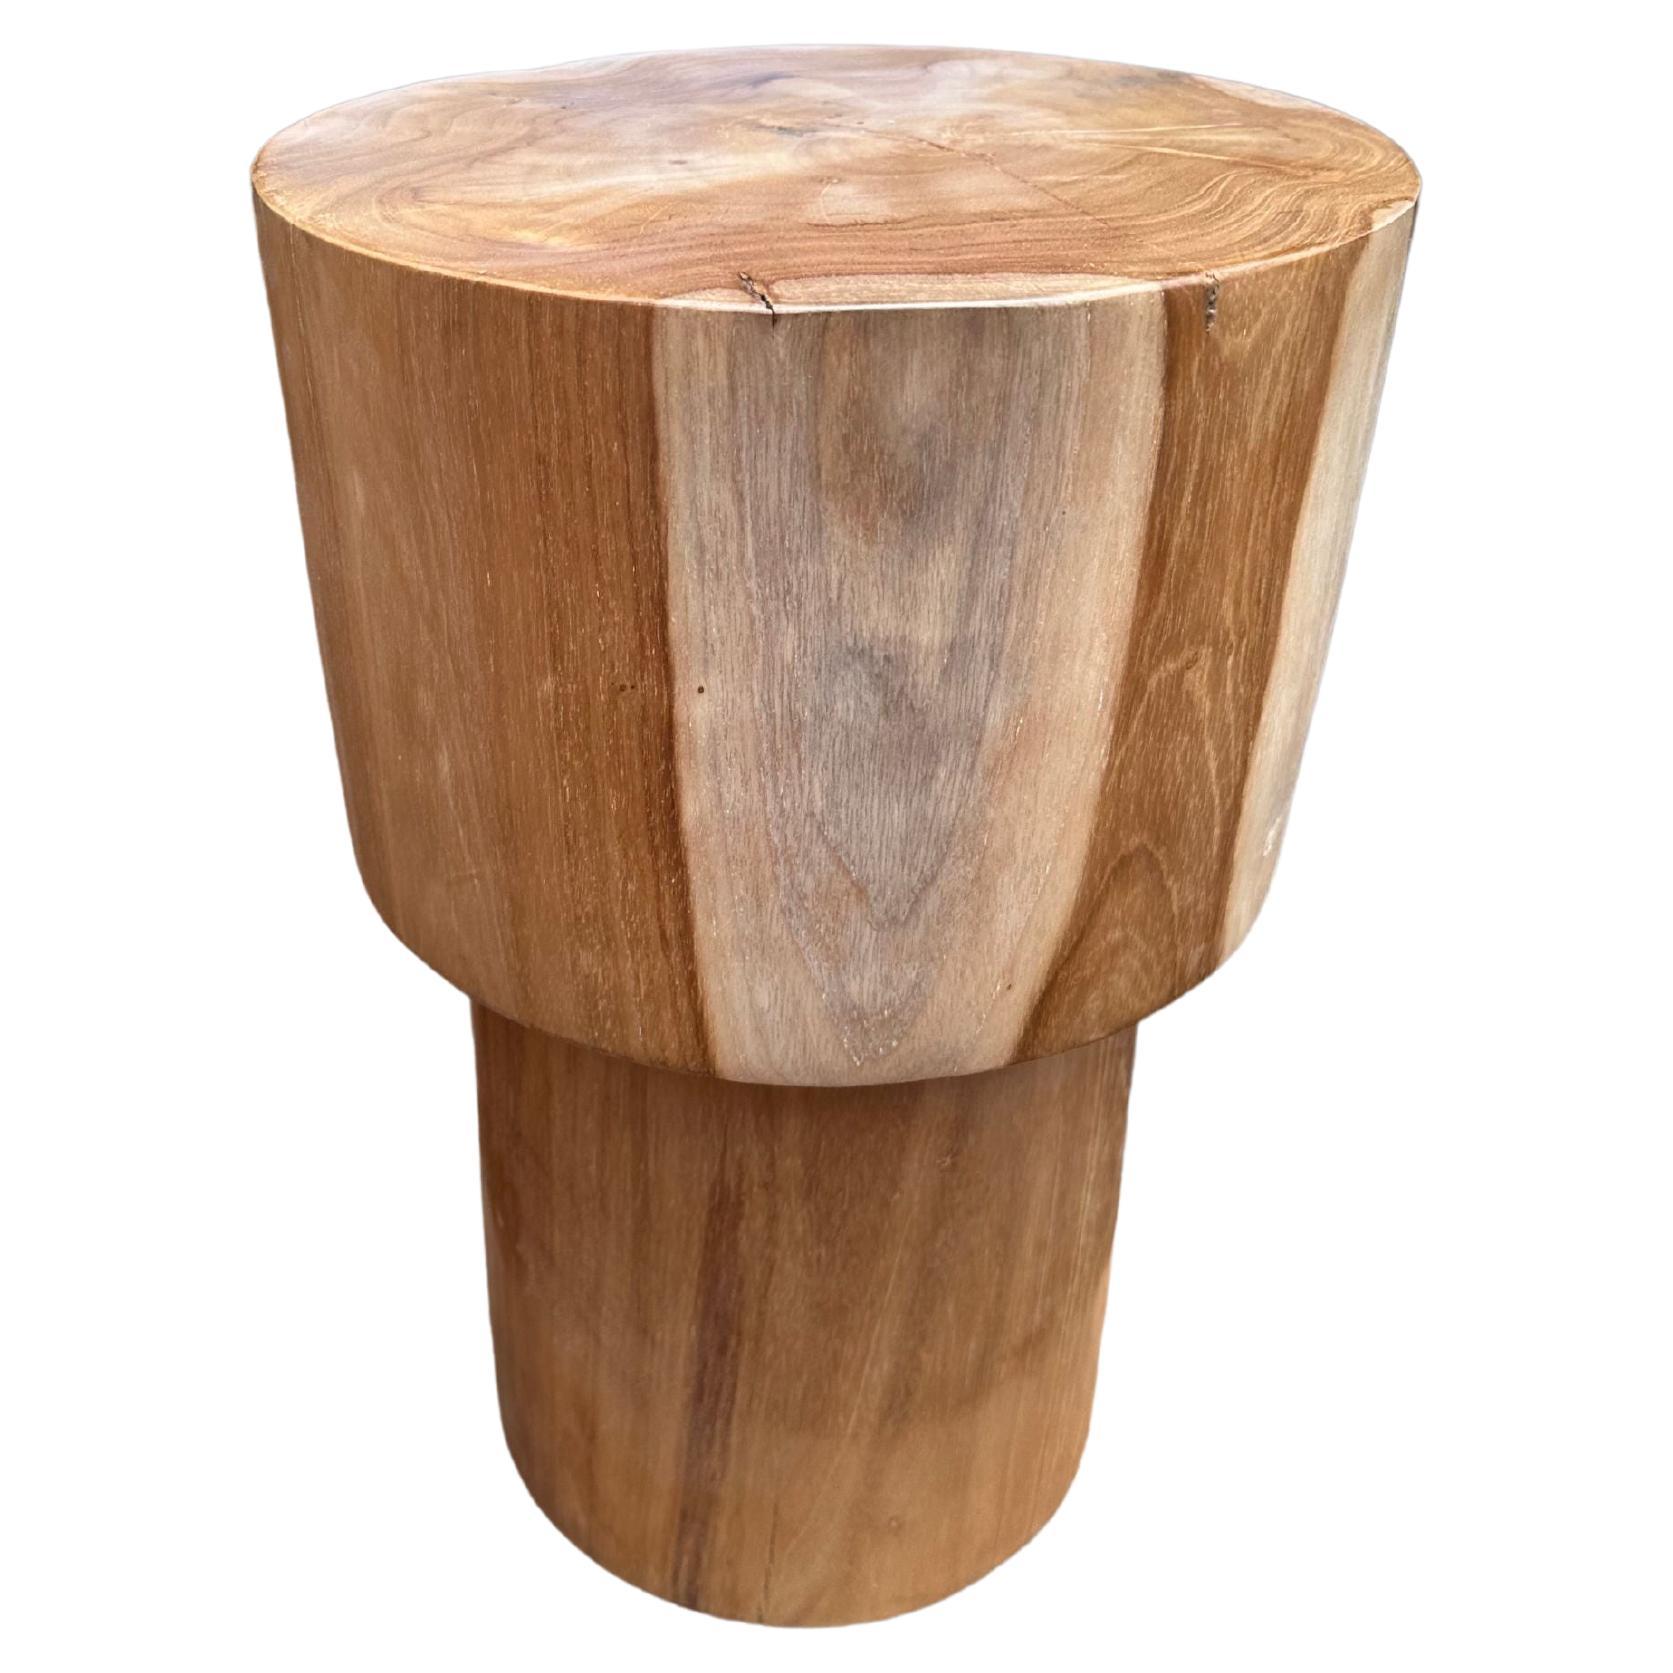 Sculptural Teak Wood Side Table, with Stunning Wood Textures, Modern Organic For Sale